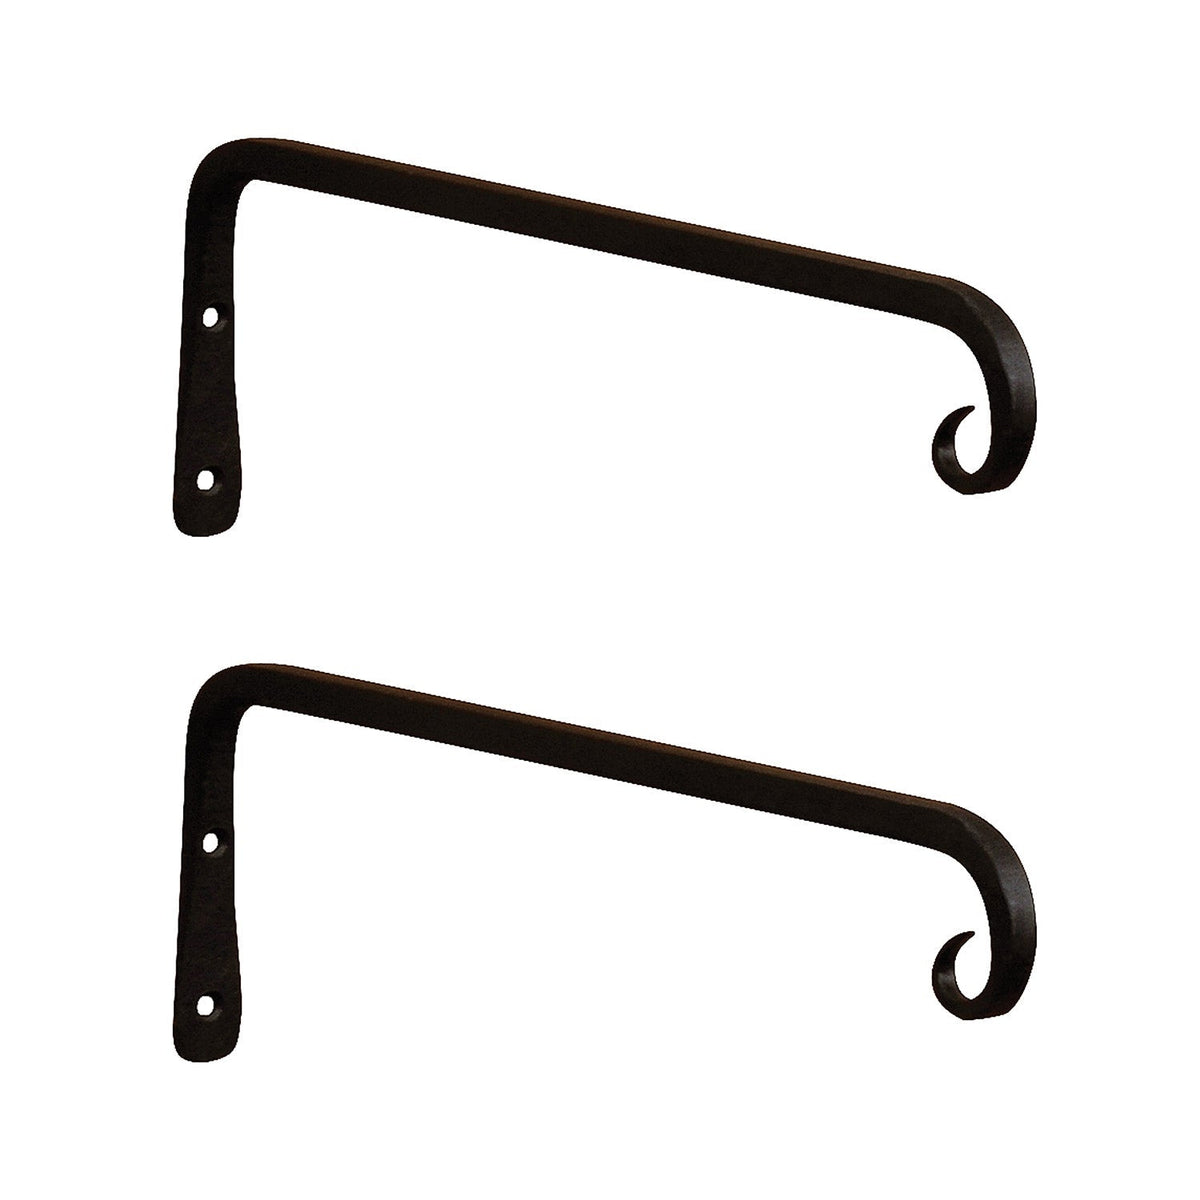 12-in Straight Downcurled Bracket Pack of 2 Straight Downcurled Bracket